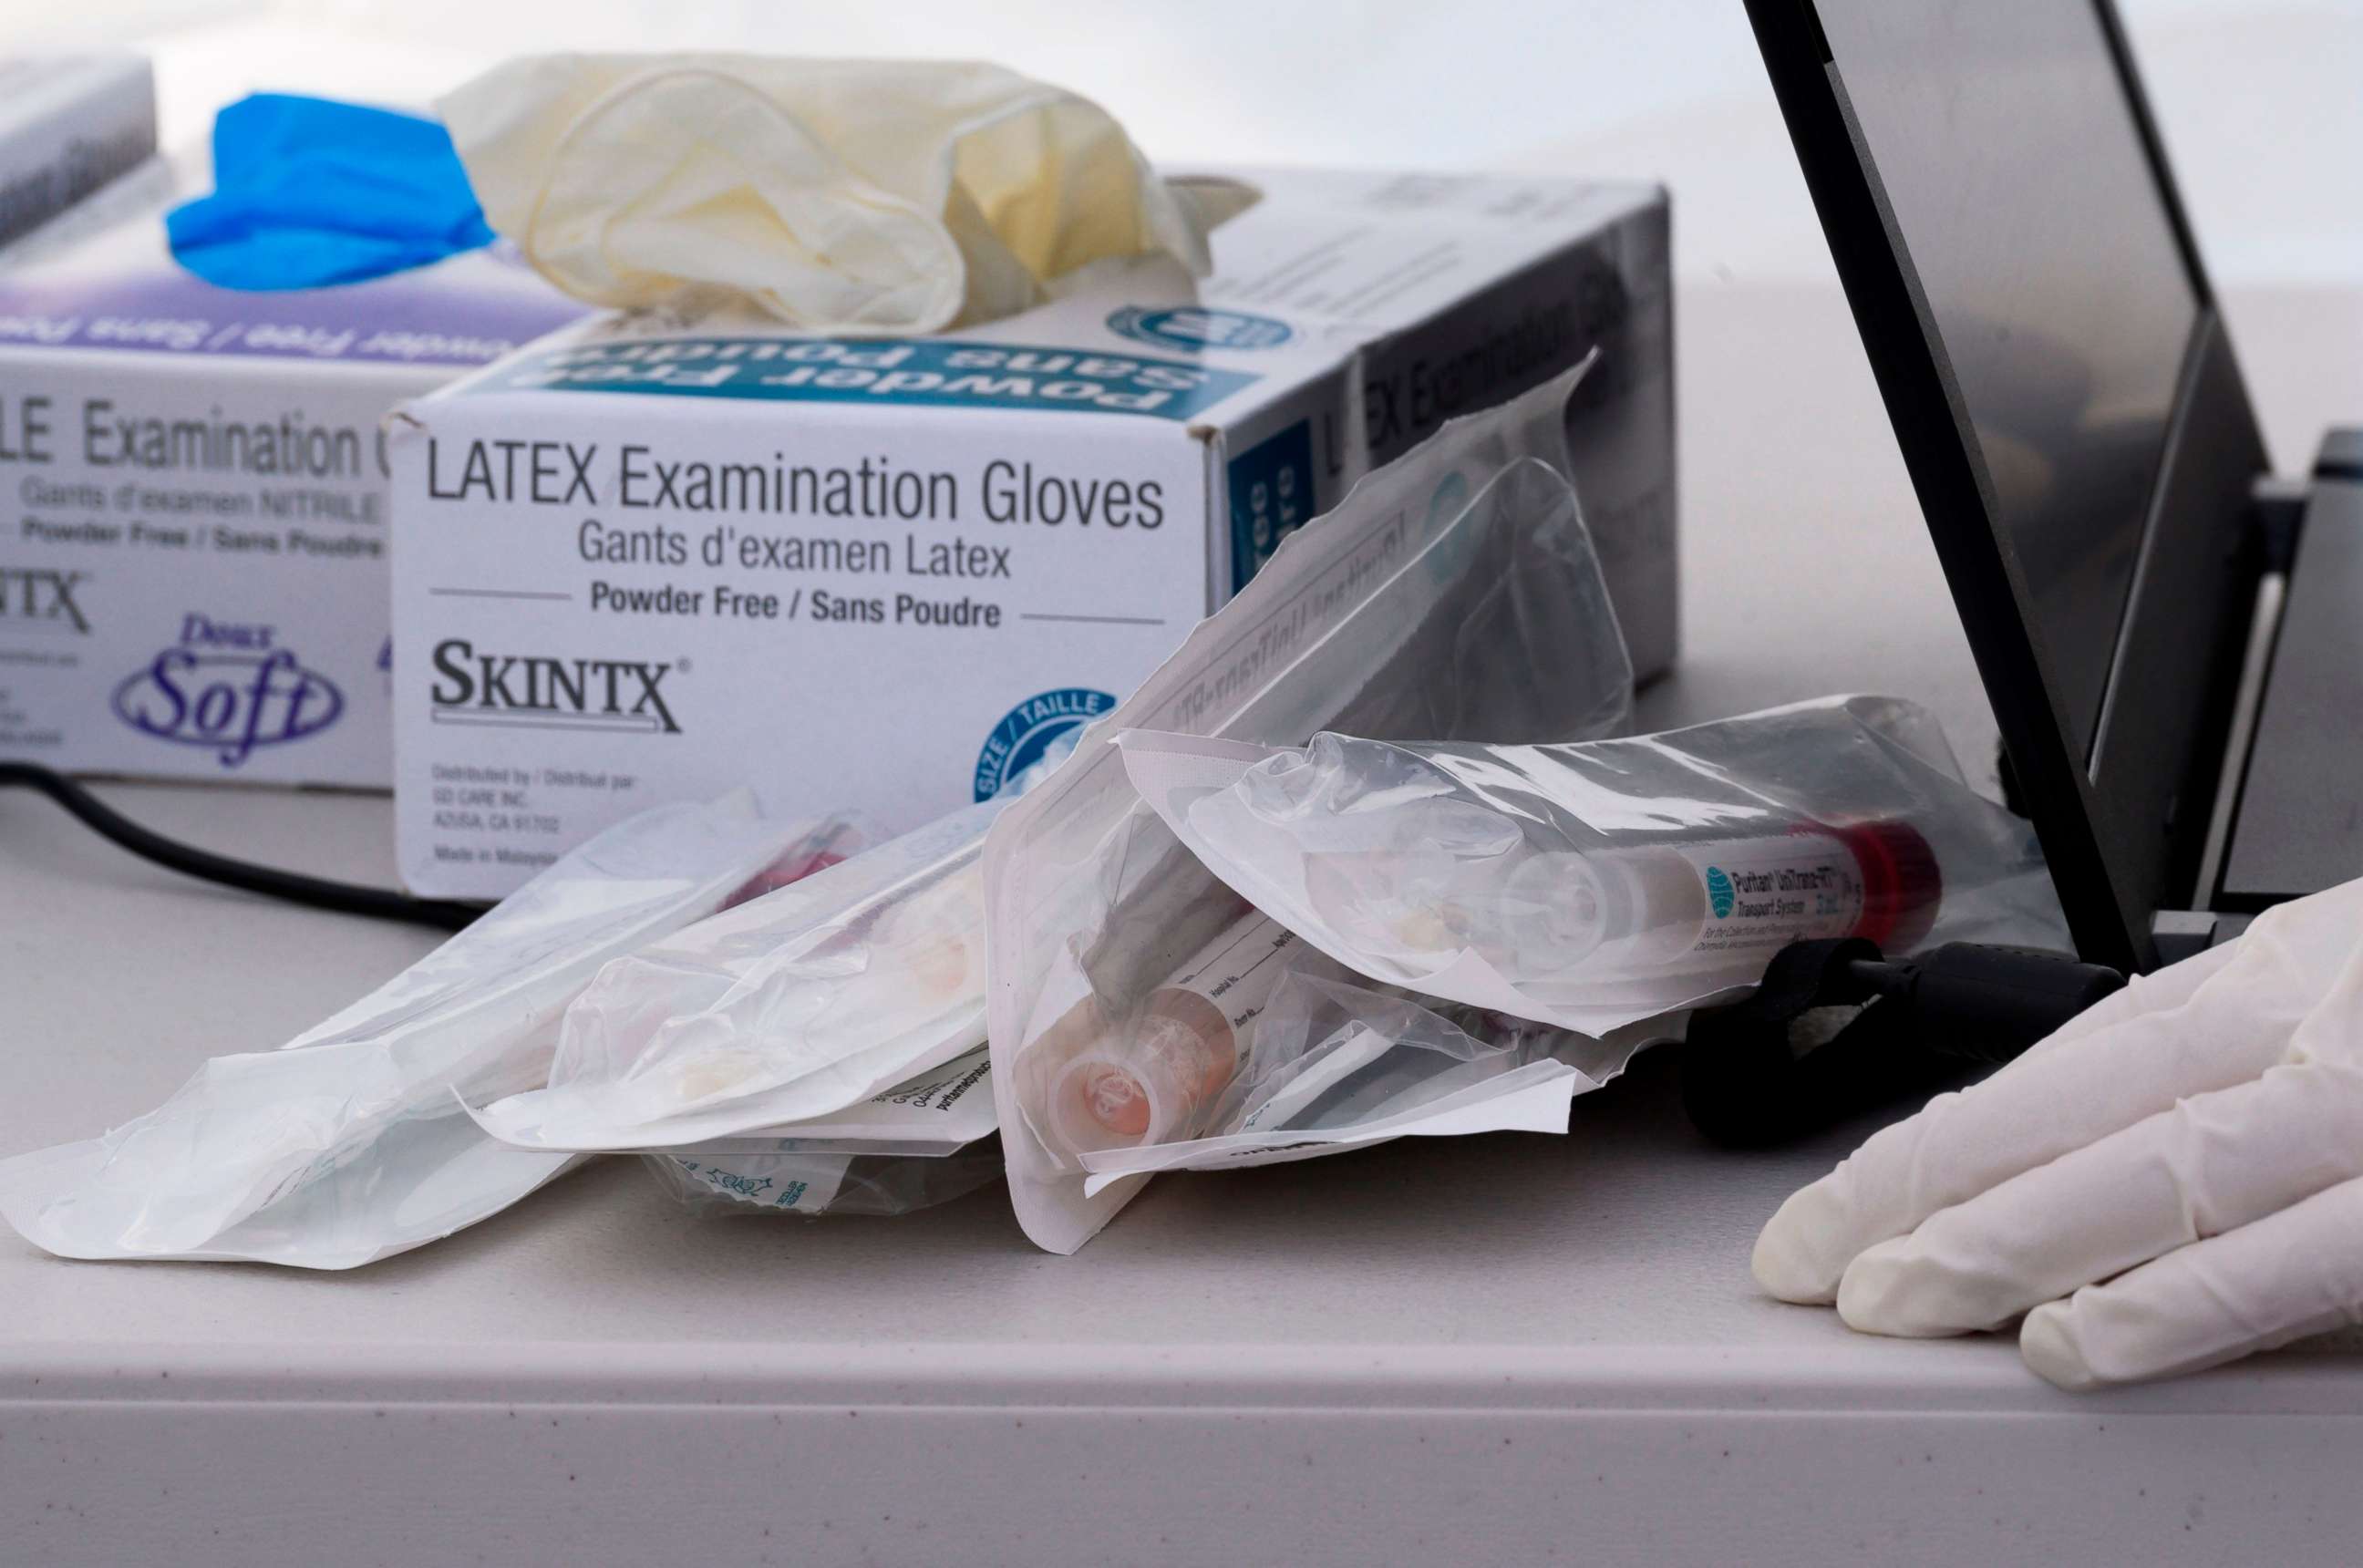 PHOTO: Nasal swab test kits and medical gloves are seen at a COVID-19 testing station in a public school parking area in Compton, California, just south of Los Angeles, on April 28, 2020.